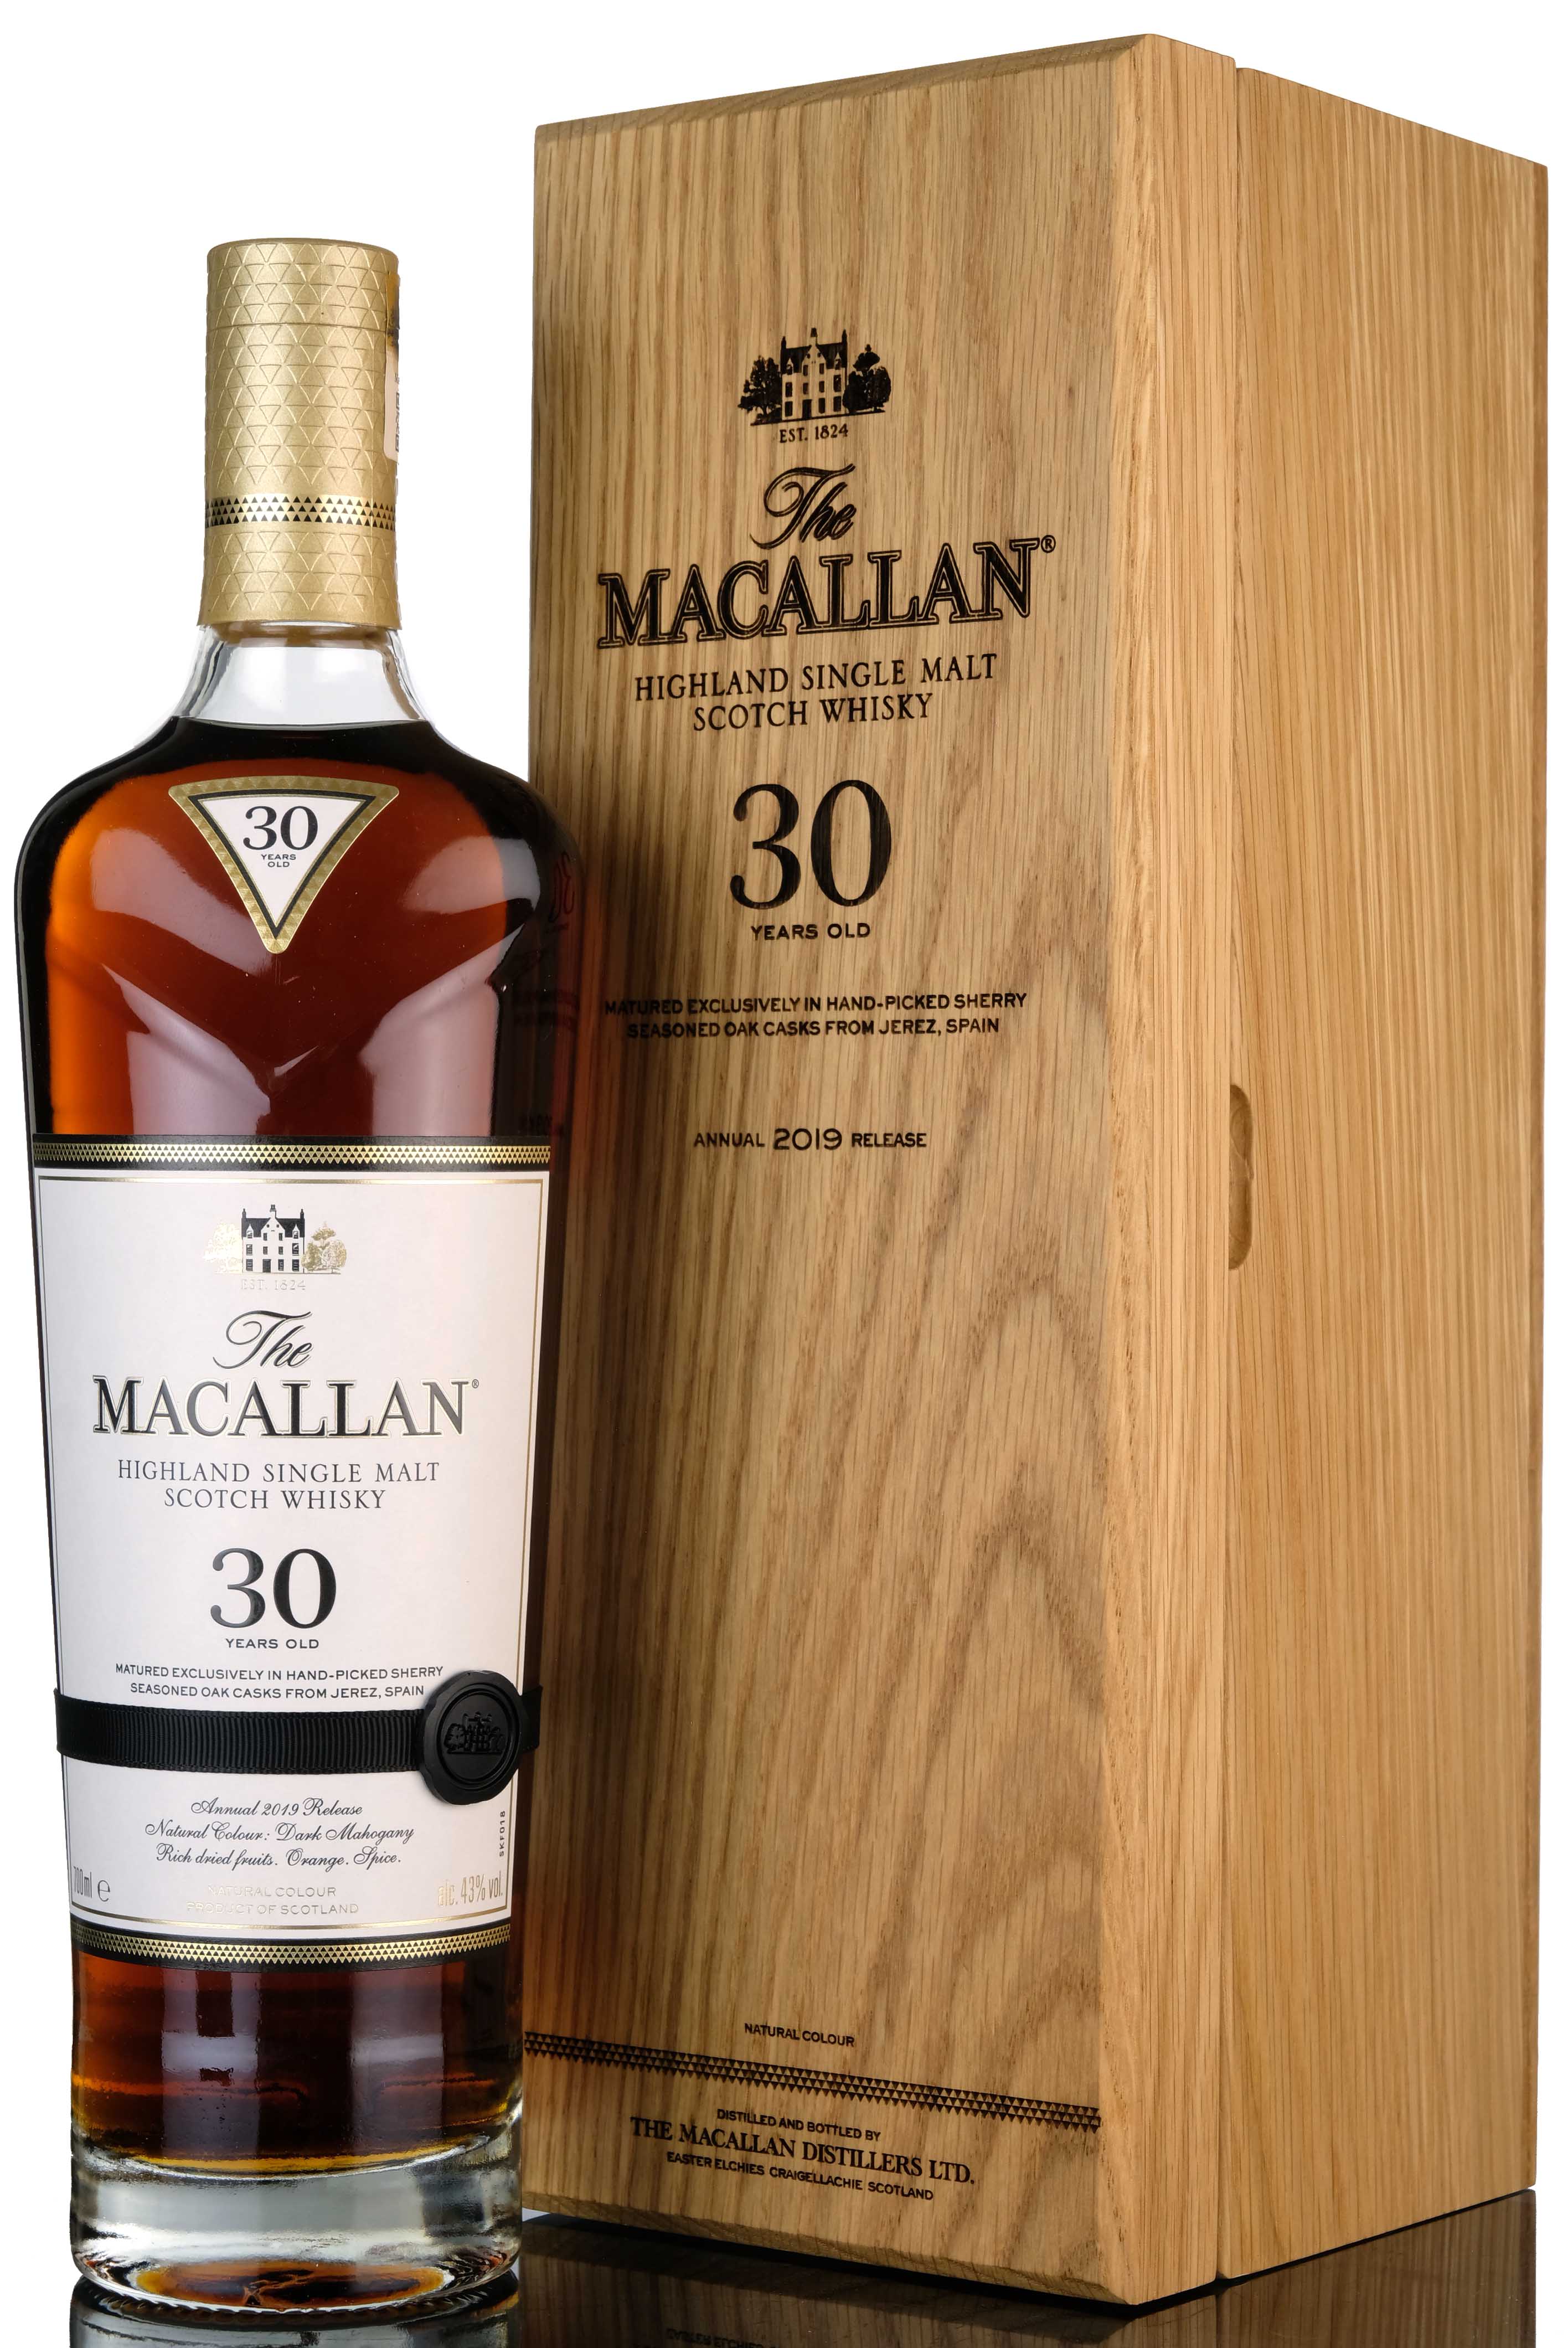 Macallan 30 Year Old - Sherry Cask - 2019 Release